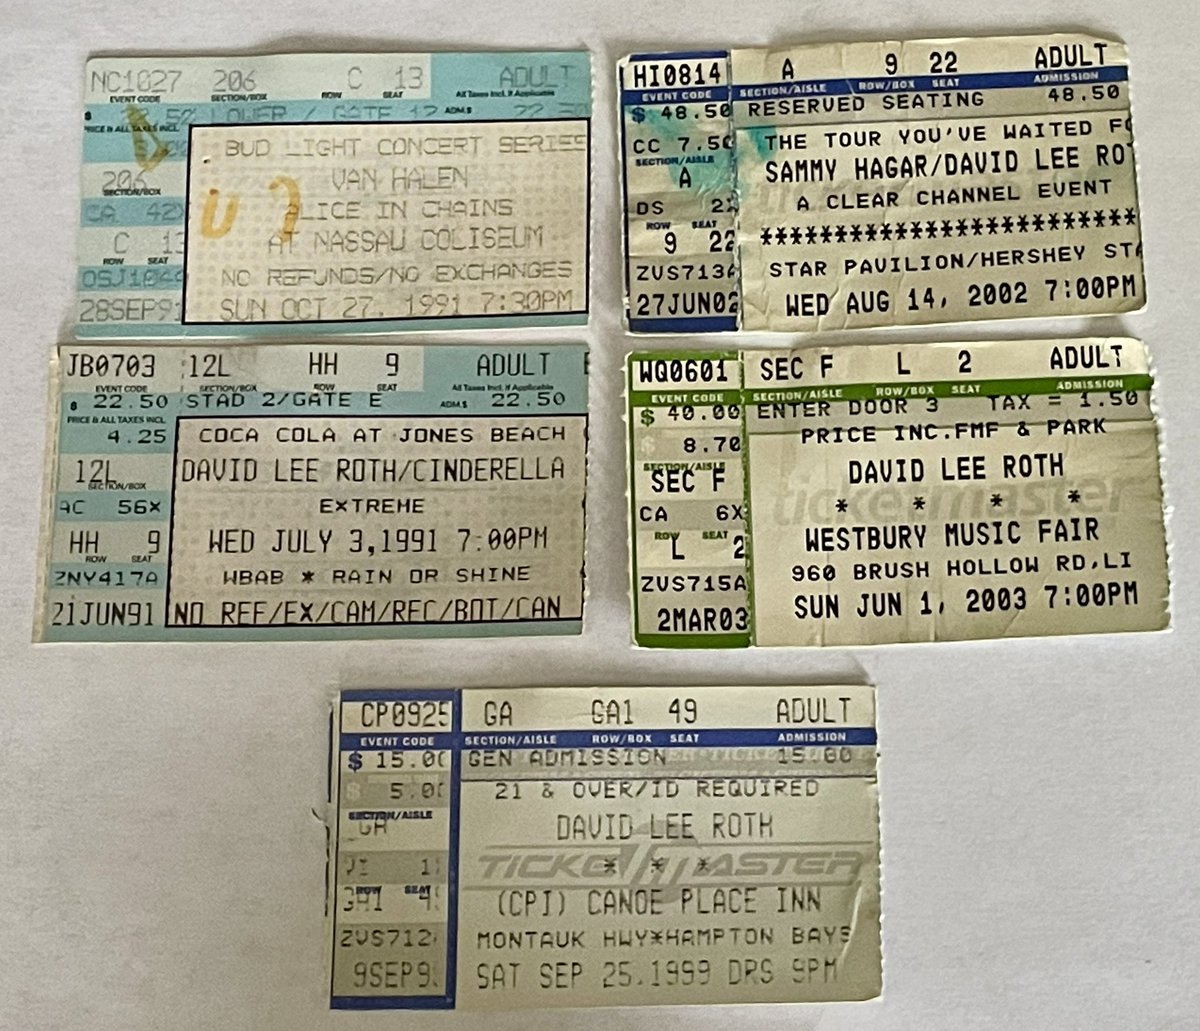 .@GregRenoff Found some of my old VH/DLR ticket stubs. Thought they were lost forever. Can’t find ‘82, ‘84 & ‘86 ones though. 😔#VanHalen #DavidLeeRoth